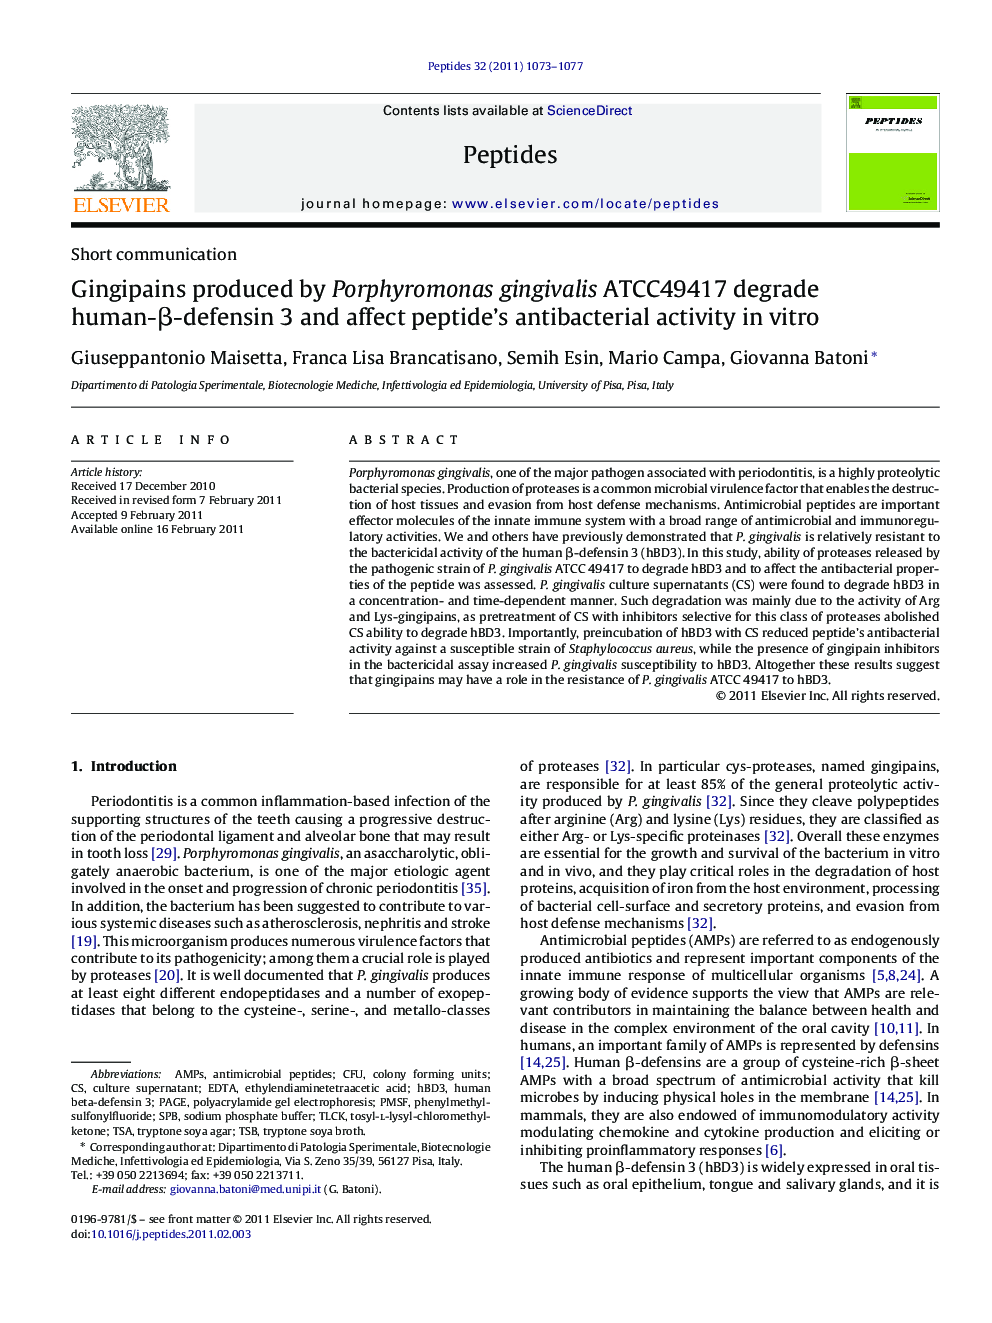 Gingipains produced by Porphyromonas gingivalis ATCC49417 degrade human-β-defensin 3 and affect peptide's antibacterial activity in vitro